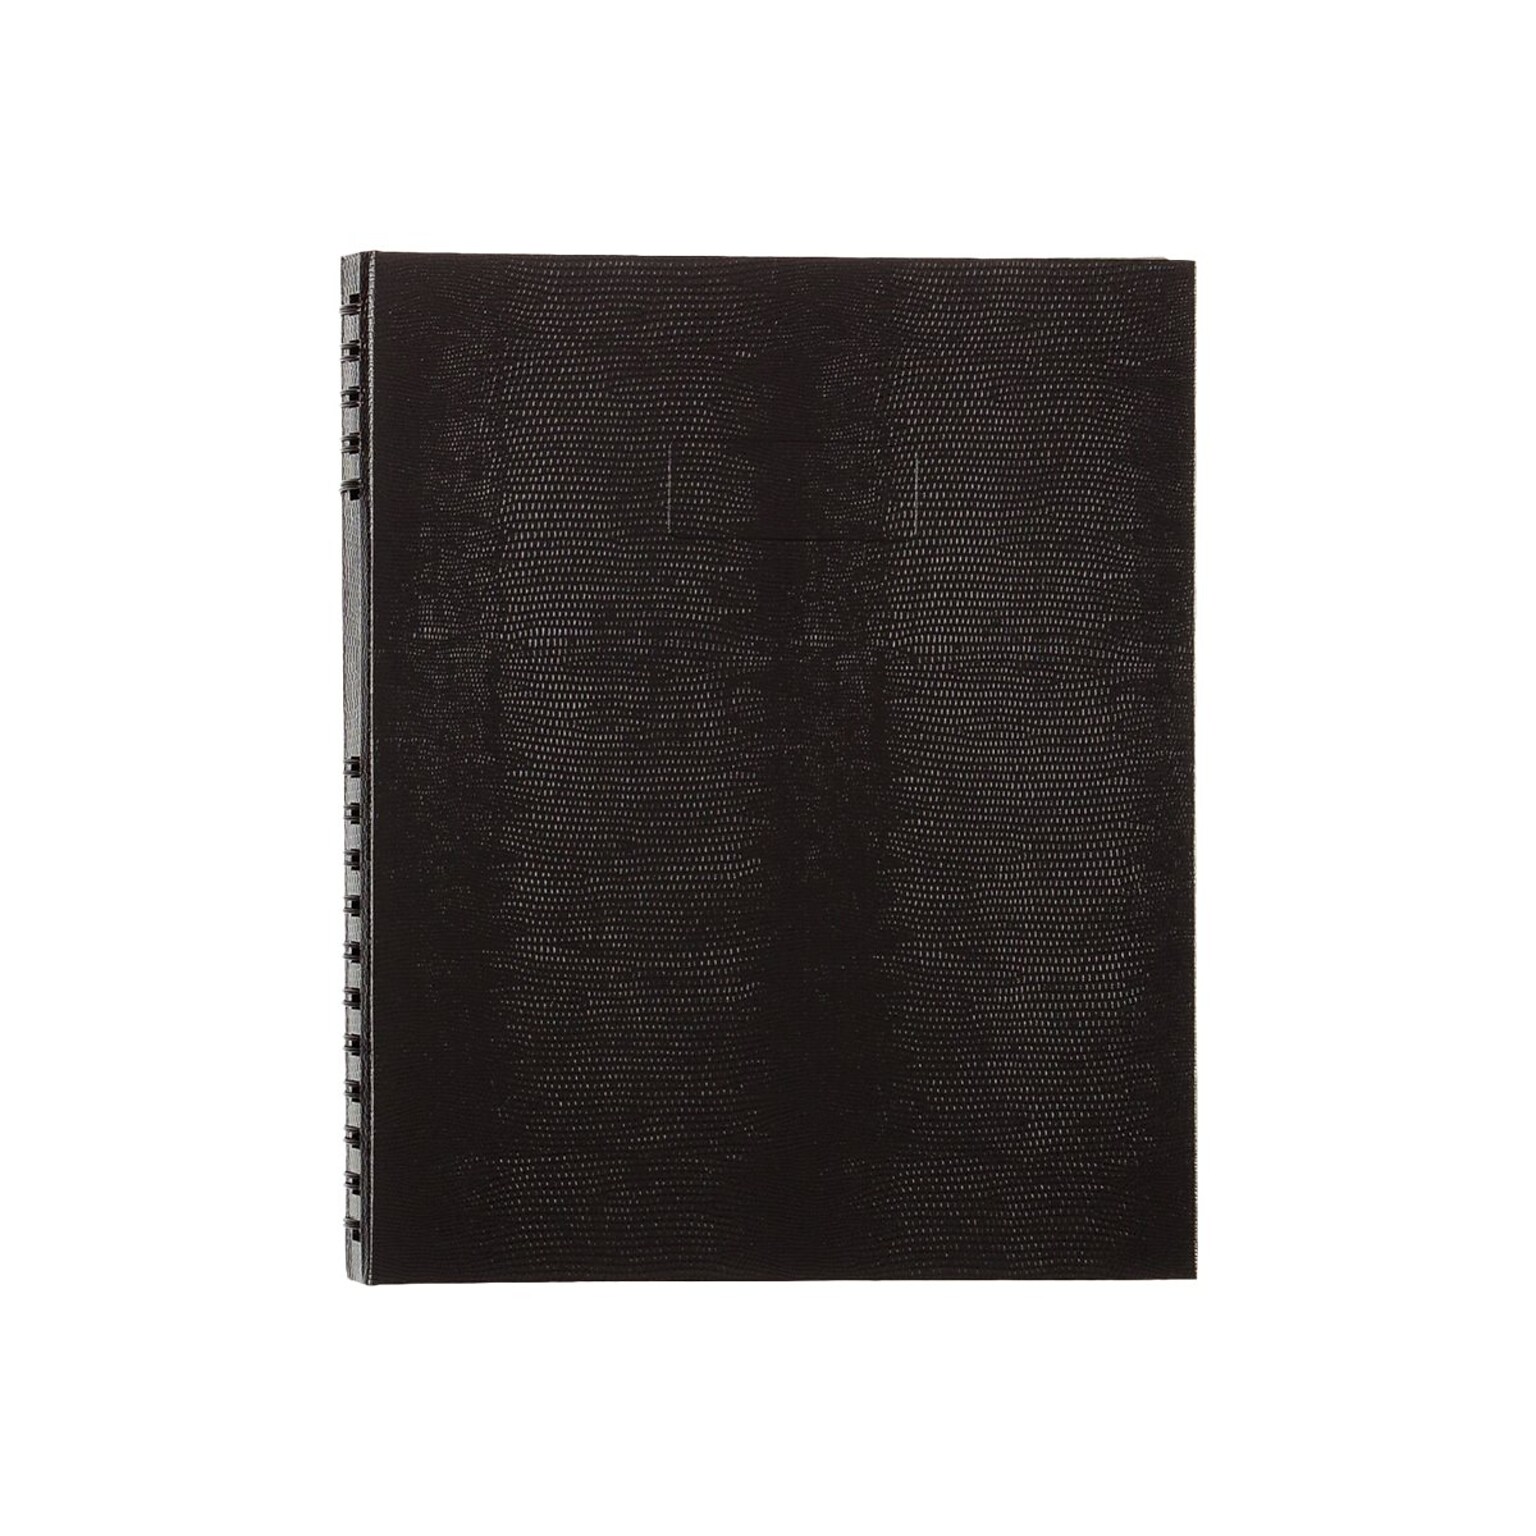 Blueline NotePro 1-Subject Professional Notebooks, 8.5 x 10.75, College Ruled, 100 Sheets, Black (A10200.BLK)